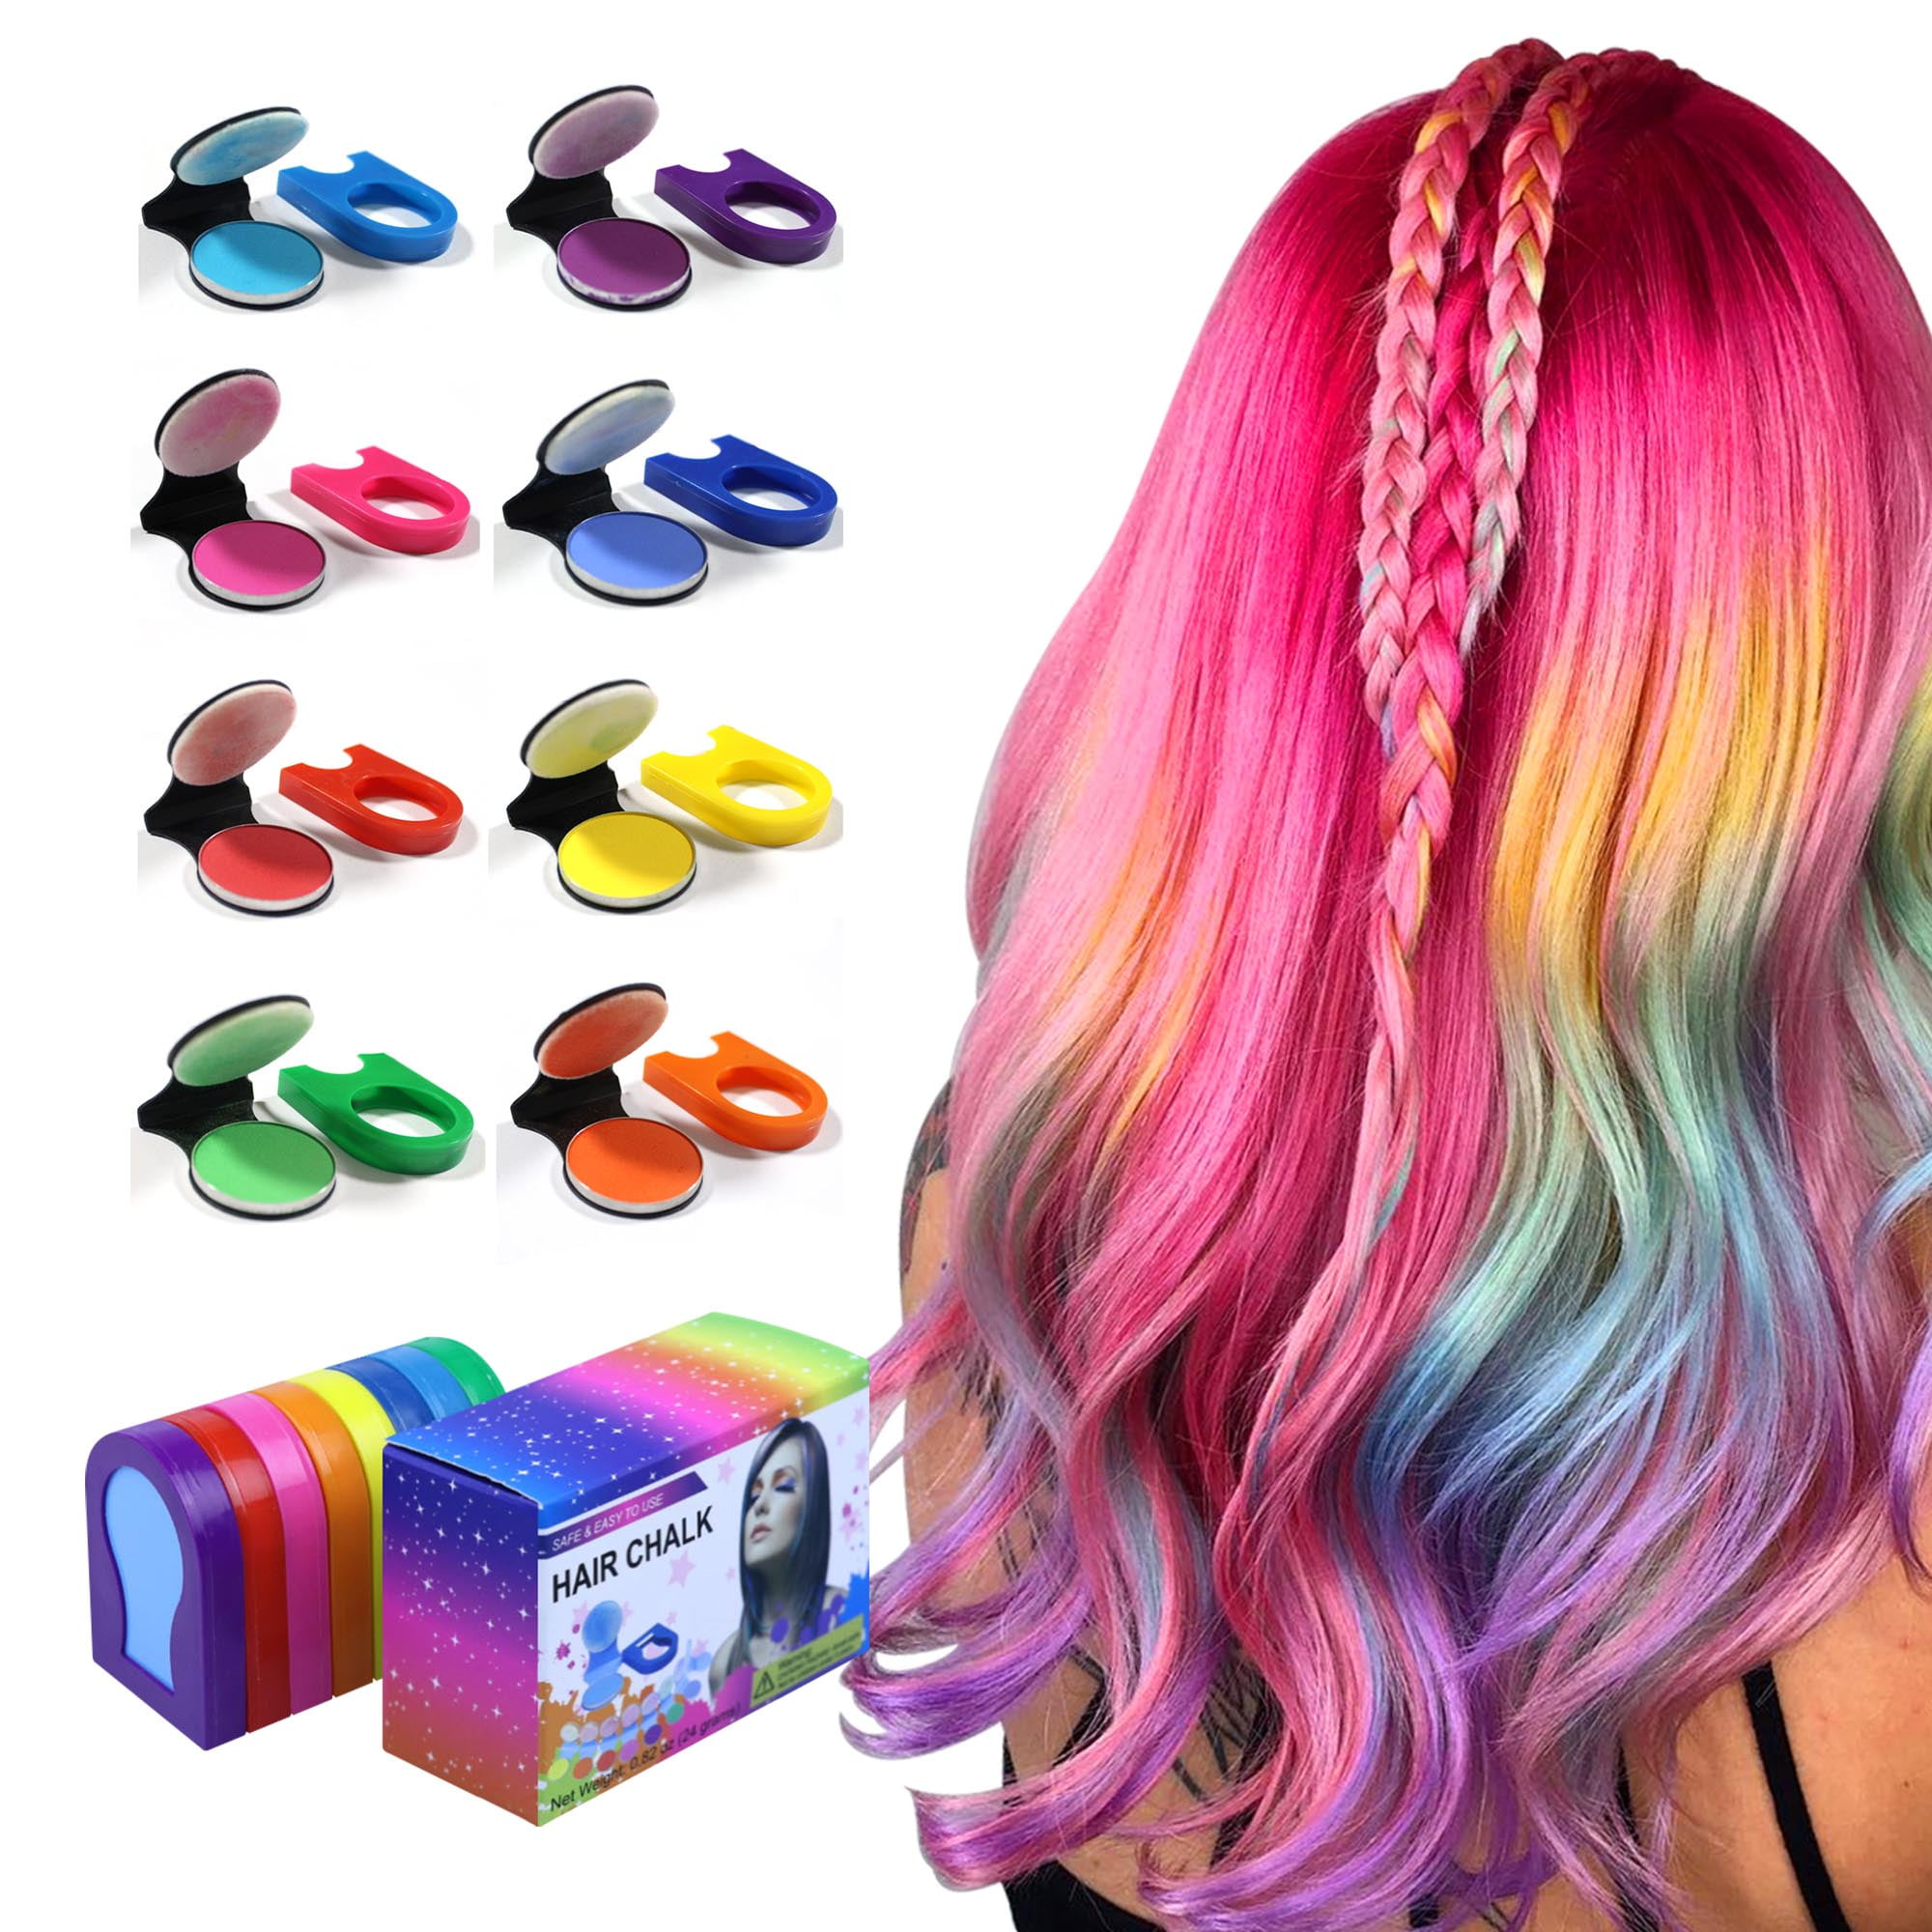 Hair Chalk Pinkiou Temporary Bright Hair Color Dye for Girls Kids, Washable  Hair Chalk Set/Kit for Girls New Year Birthday Party Cosplay DIY - 8 Colors  